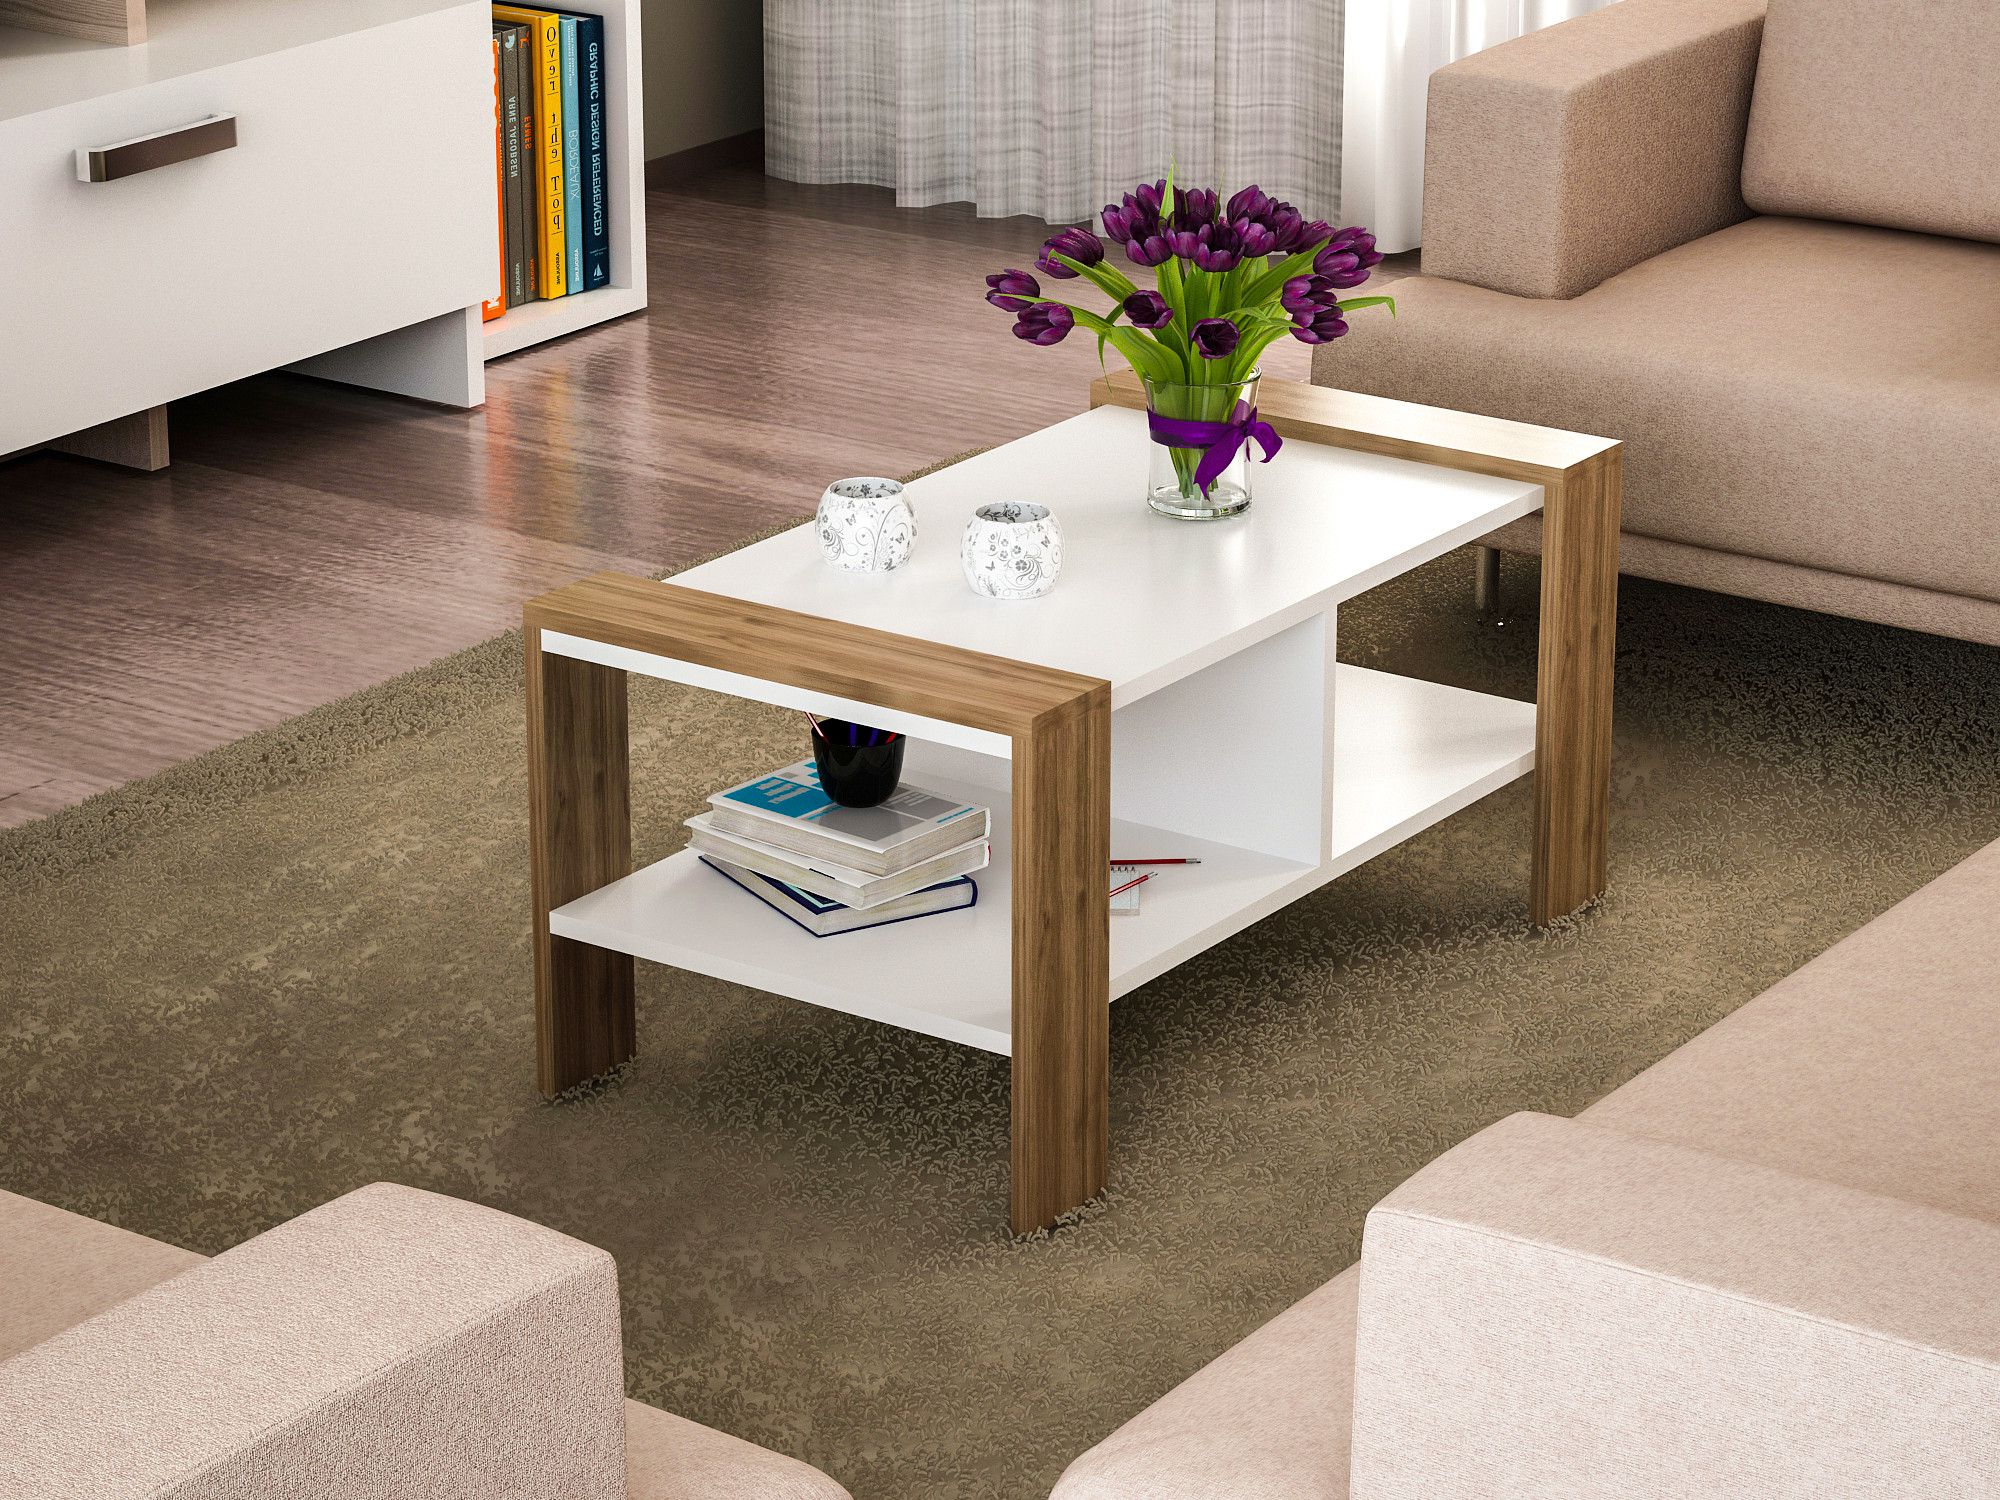 Erica – White, Walnut Coffee Table 756frn2811 – White  Walnut Intended For 2019 Melamine Coffee Tables (View 2 of 20)